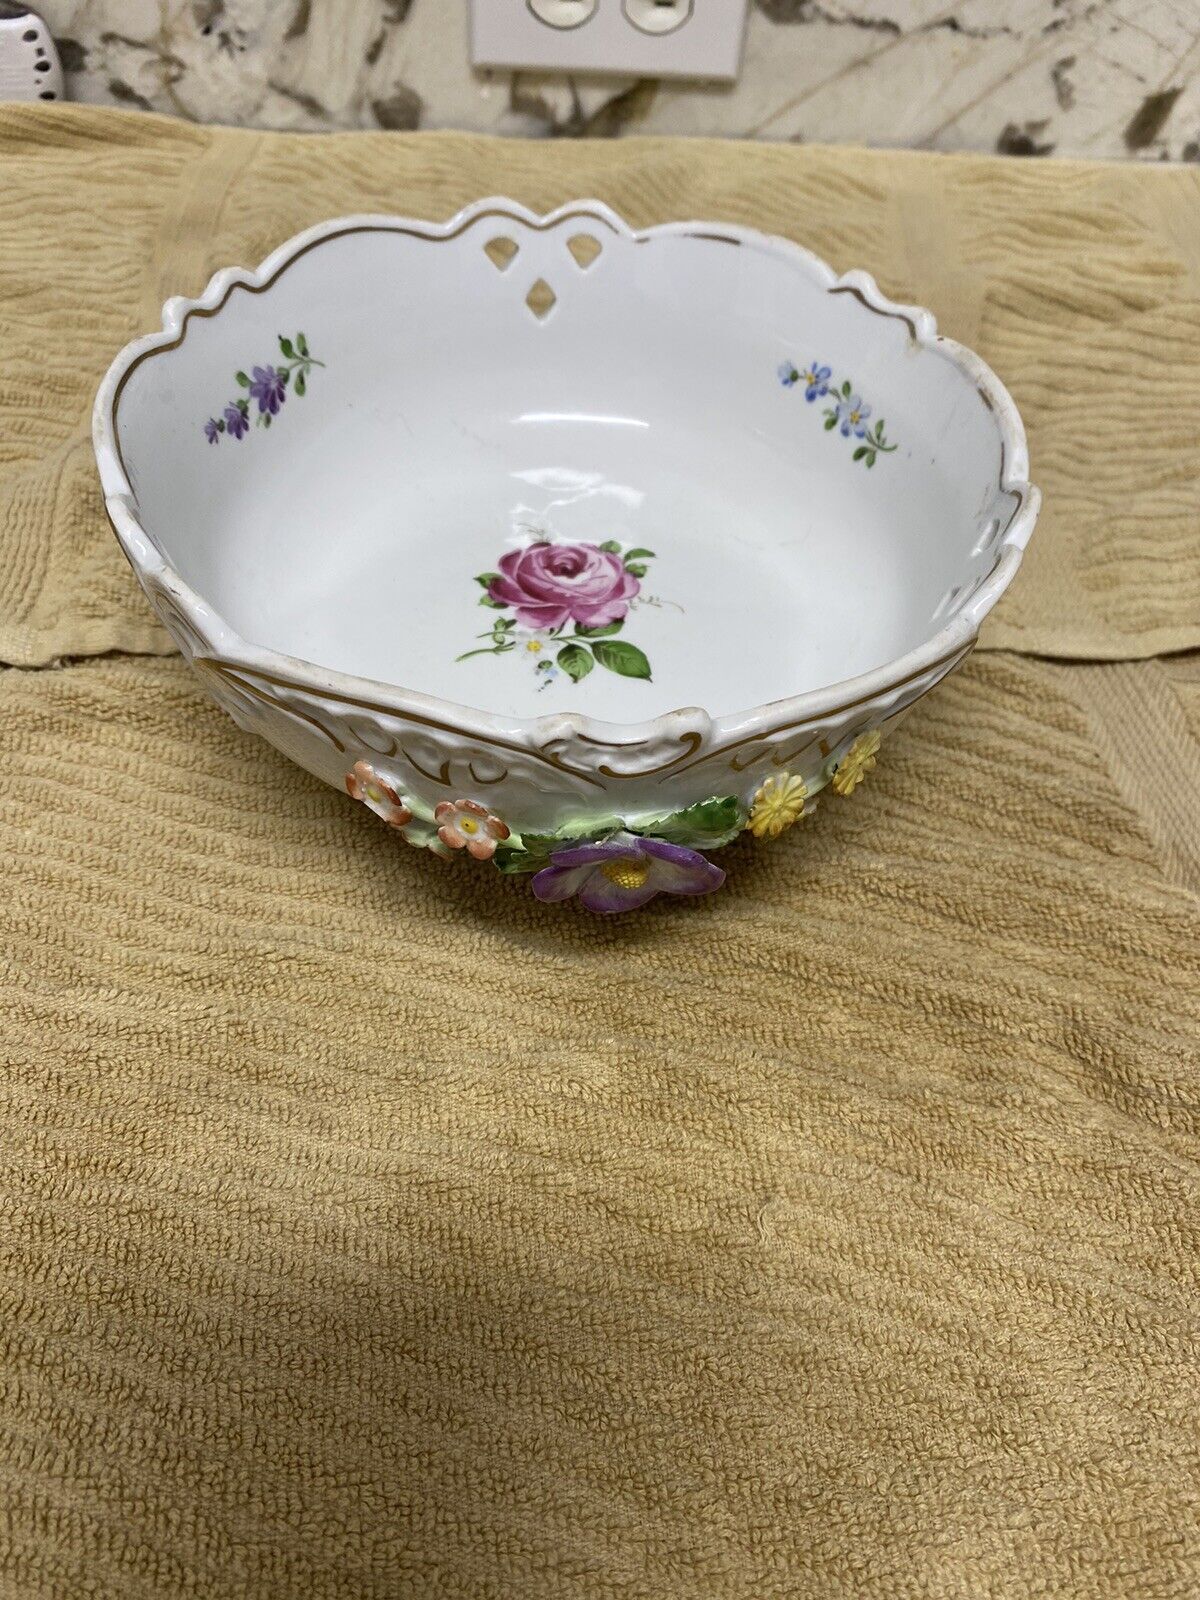 Vintage Von Schierholz Hand Painted Porcelain Footed Bowl Made In Germany